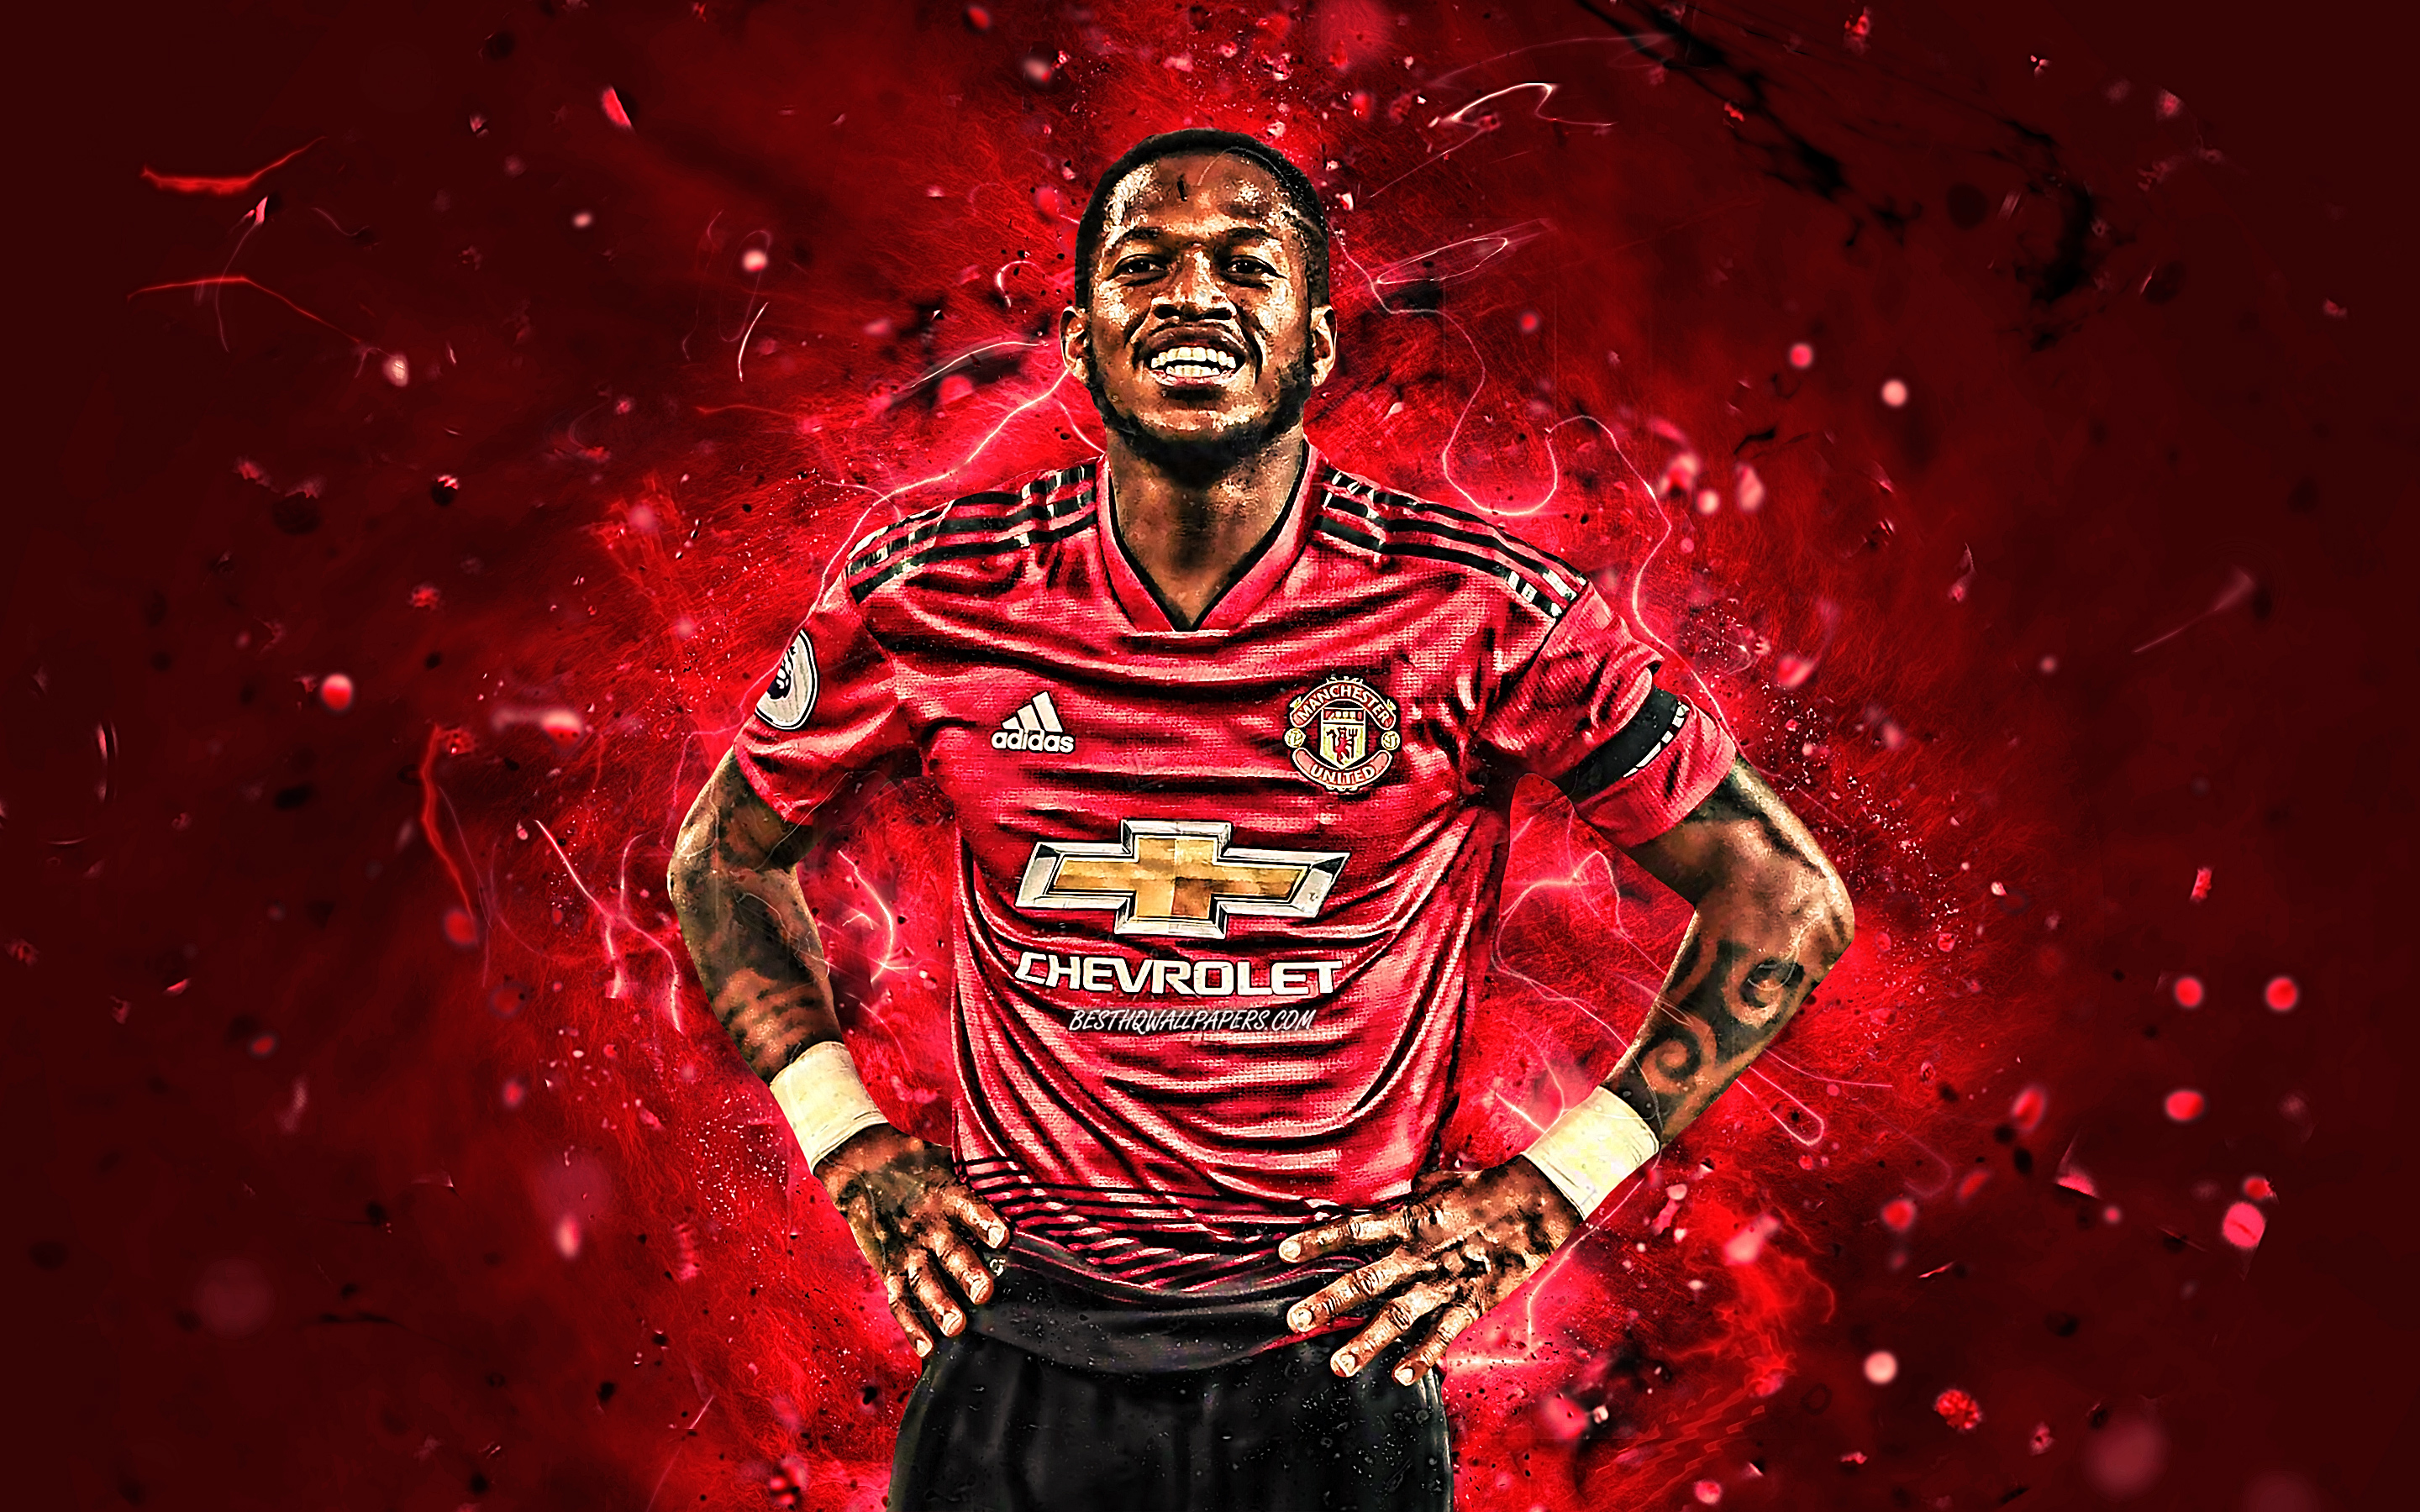 Download wallpaper Fred, brazilian footballers, Manchester United, Premier League, Frederico Rodrigues de Paula Santos, England, neon lights, soccer, fan art, football, Man United for desktop with resolution 2880x1800. High Quality HD picture